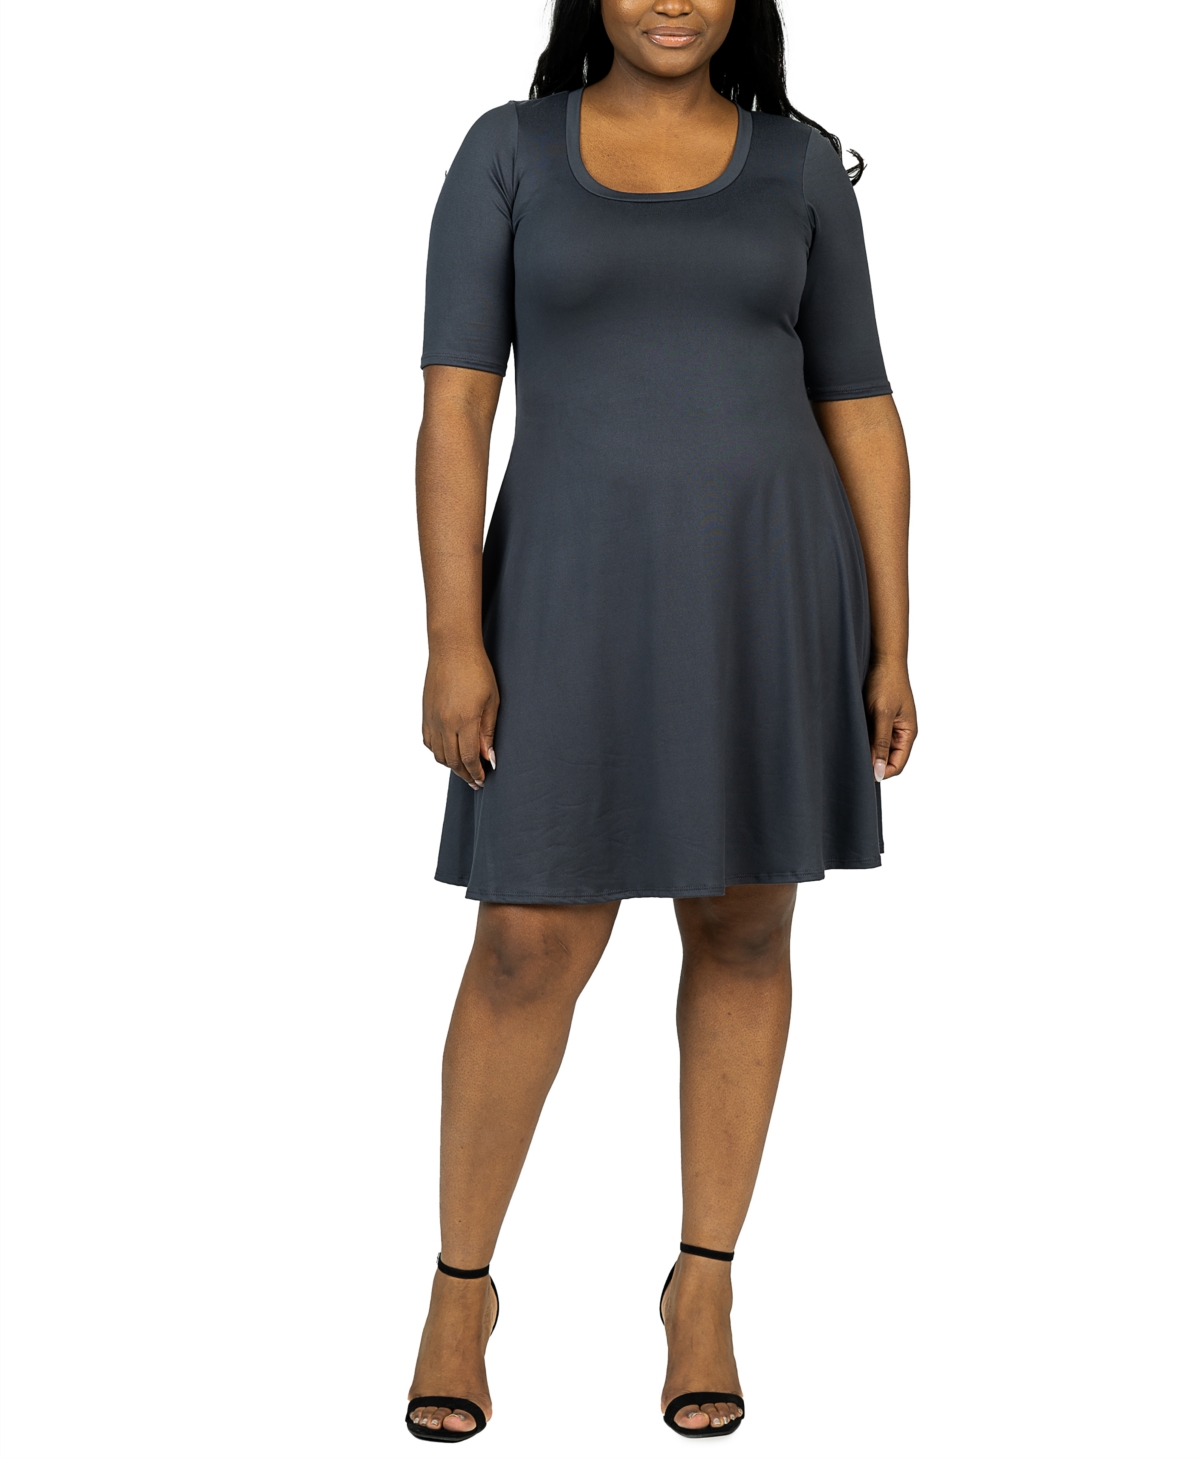 24seven Comfort Apparel Plus Size Knee Length Dress In Charcoal